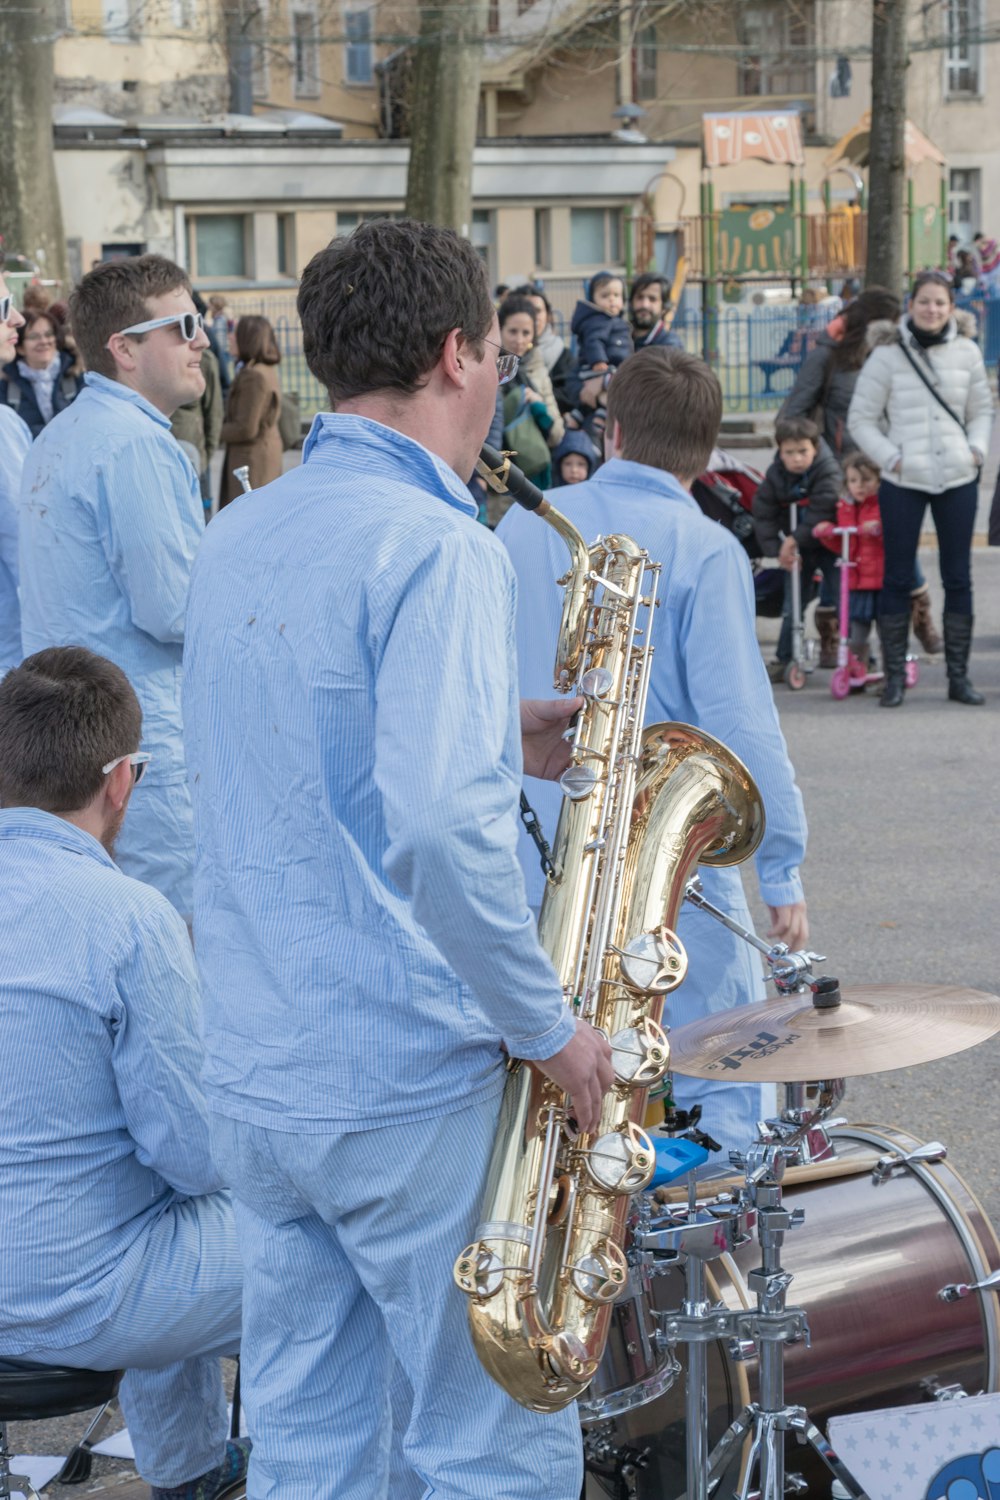 a group of men playing musical instruments in front of a crowd